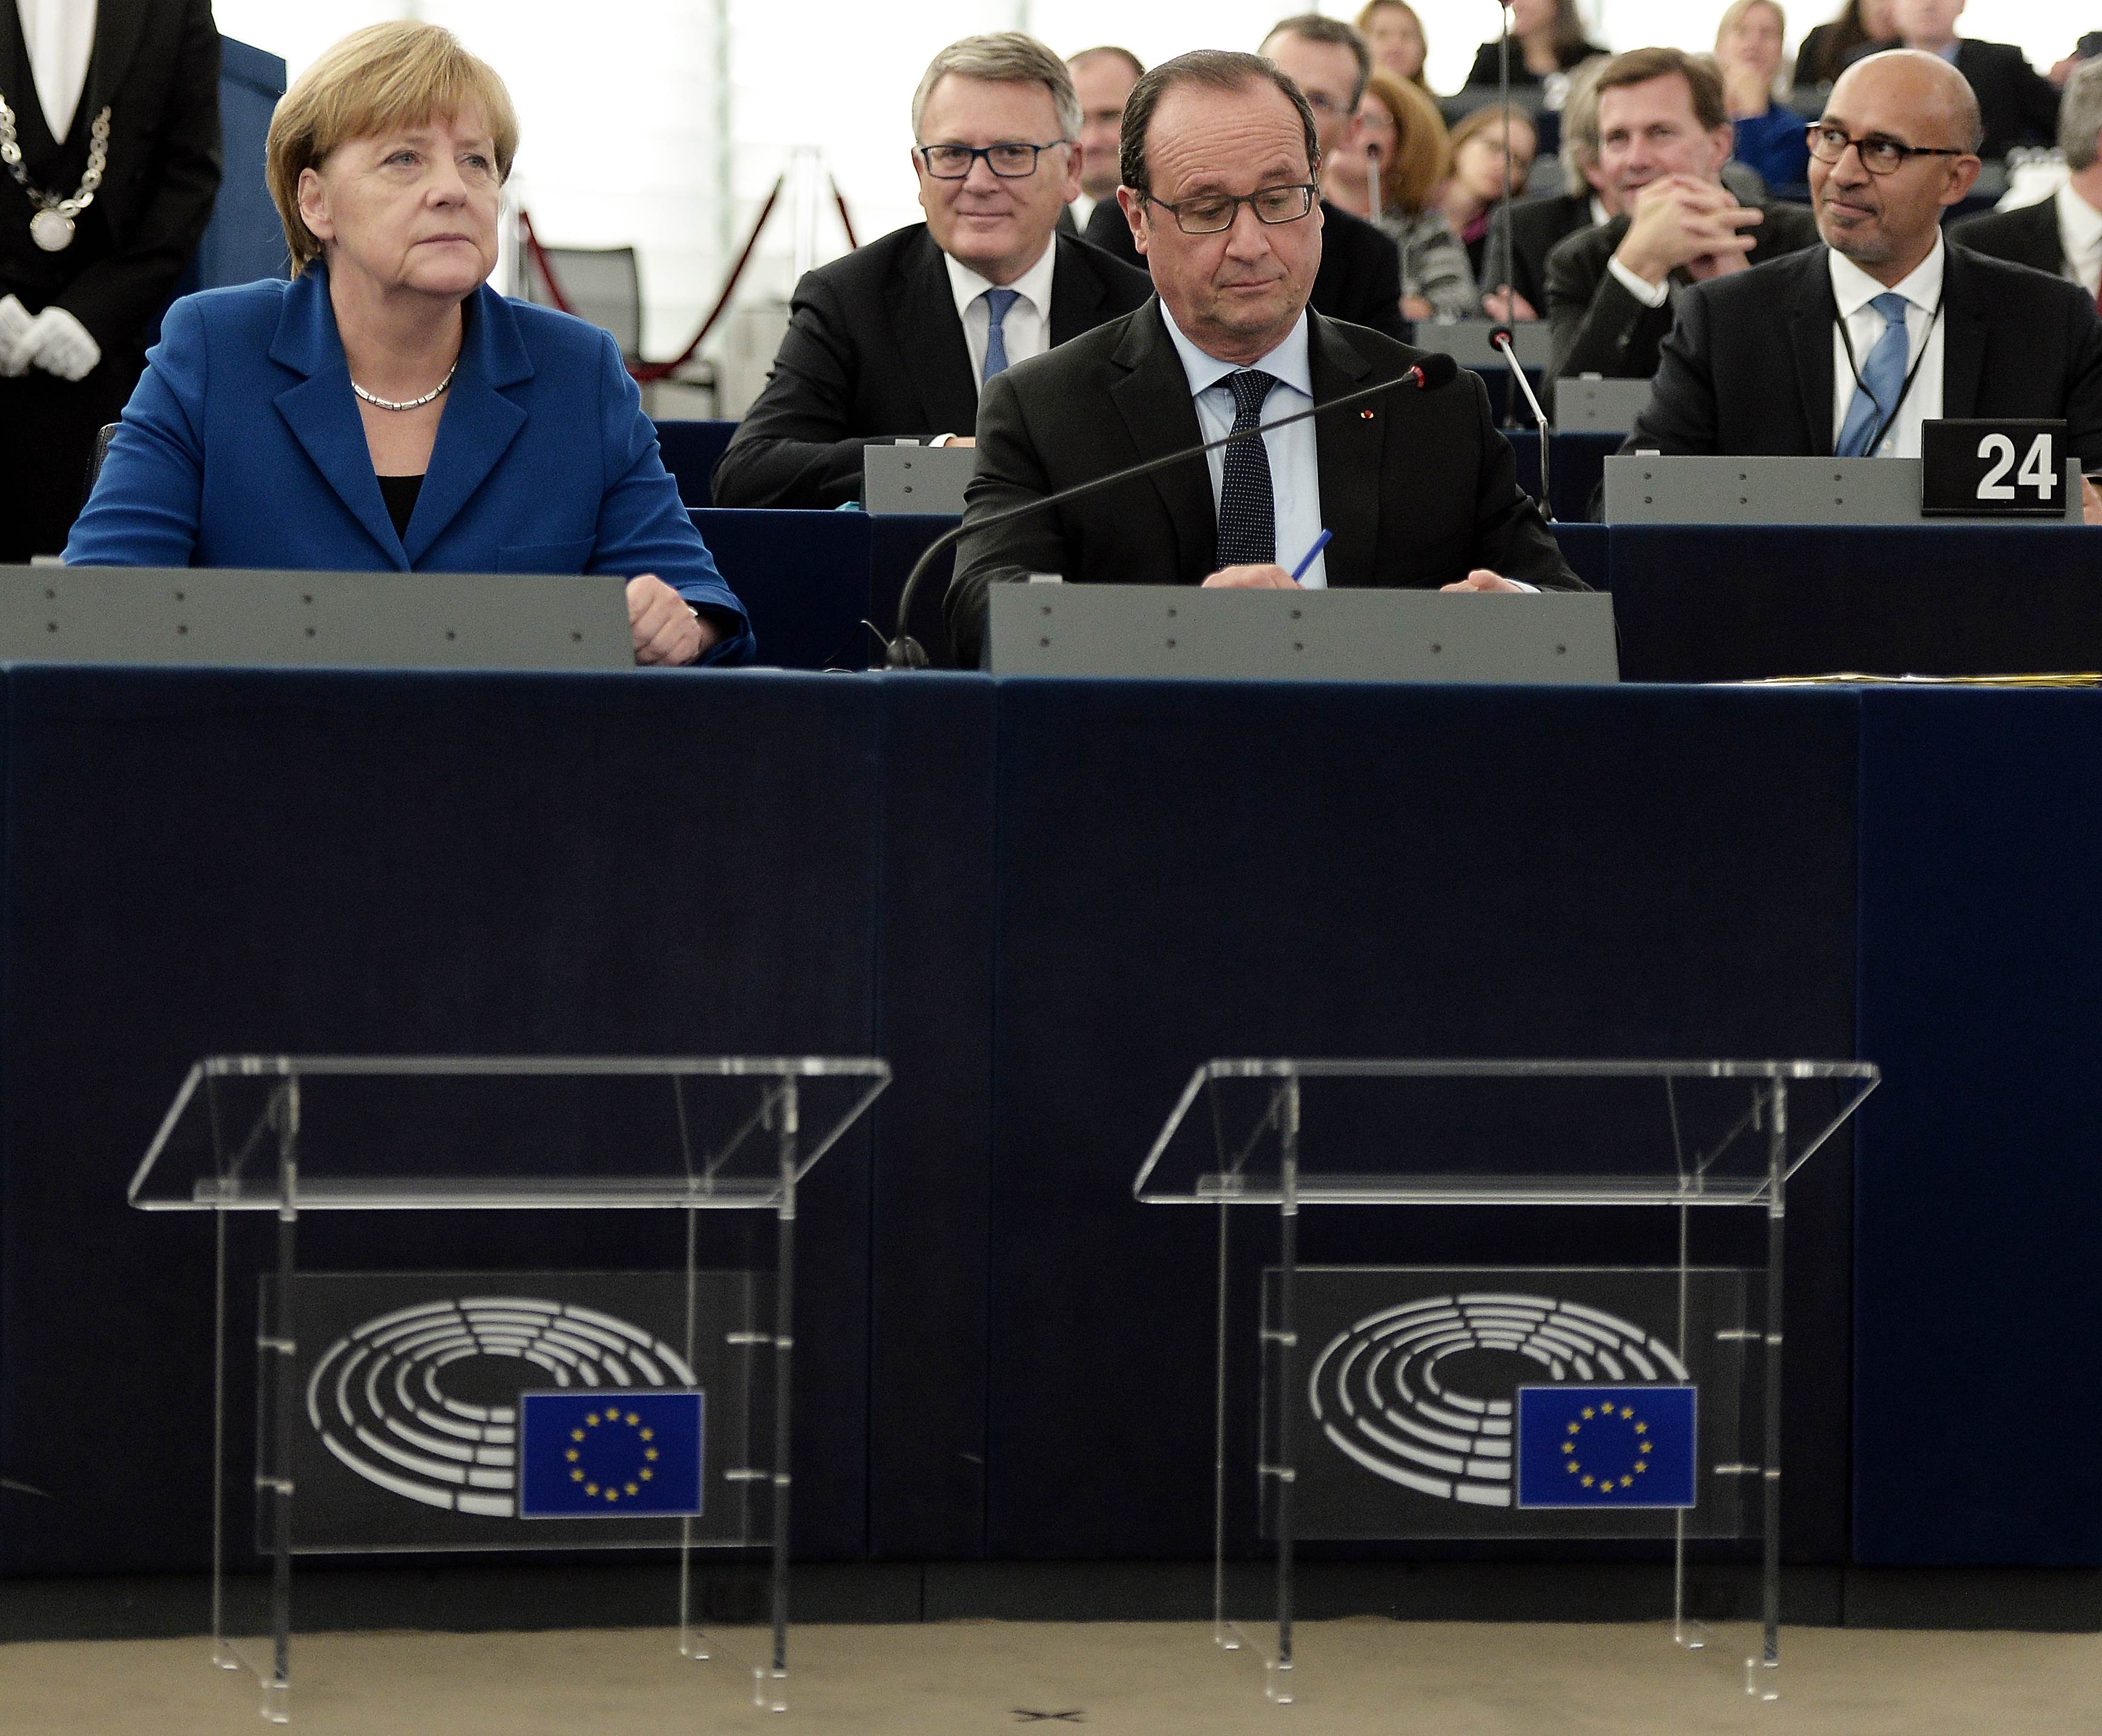 German Chancellor Angela Merkel (L) and French President Francois Hollande (R) are pictured at the European Parliament prior to a joint address on October 7, 2015 in Strasbourg, eastern France. German Chancellor Angela Merkel and French President Francois Hollande are set to give a joint address at the European Parliament, the first such event by leaders of the two countries since 1989. Merkel and Hollande, the leaders of the European Union's two biggest economies, have played a driving role in a series of challenges that have gripped the 28-nation bloc, ranging from the migrant crisis to the Greek debt saga and the conflict in Ukraine. AFP PHOTO/FREDERICK FLORIN